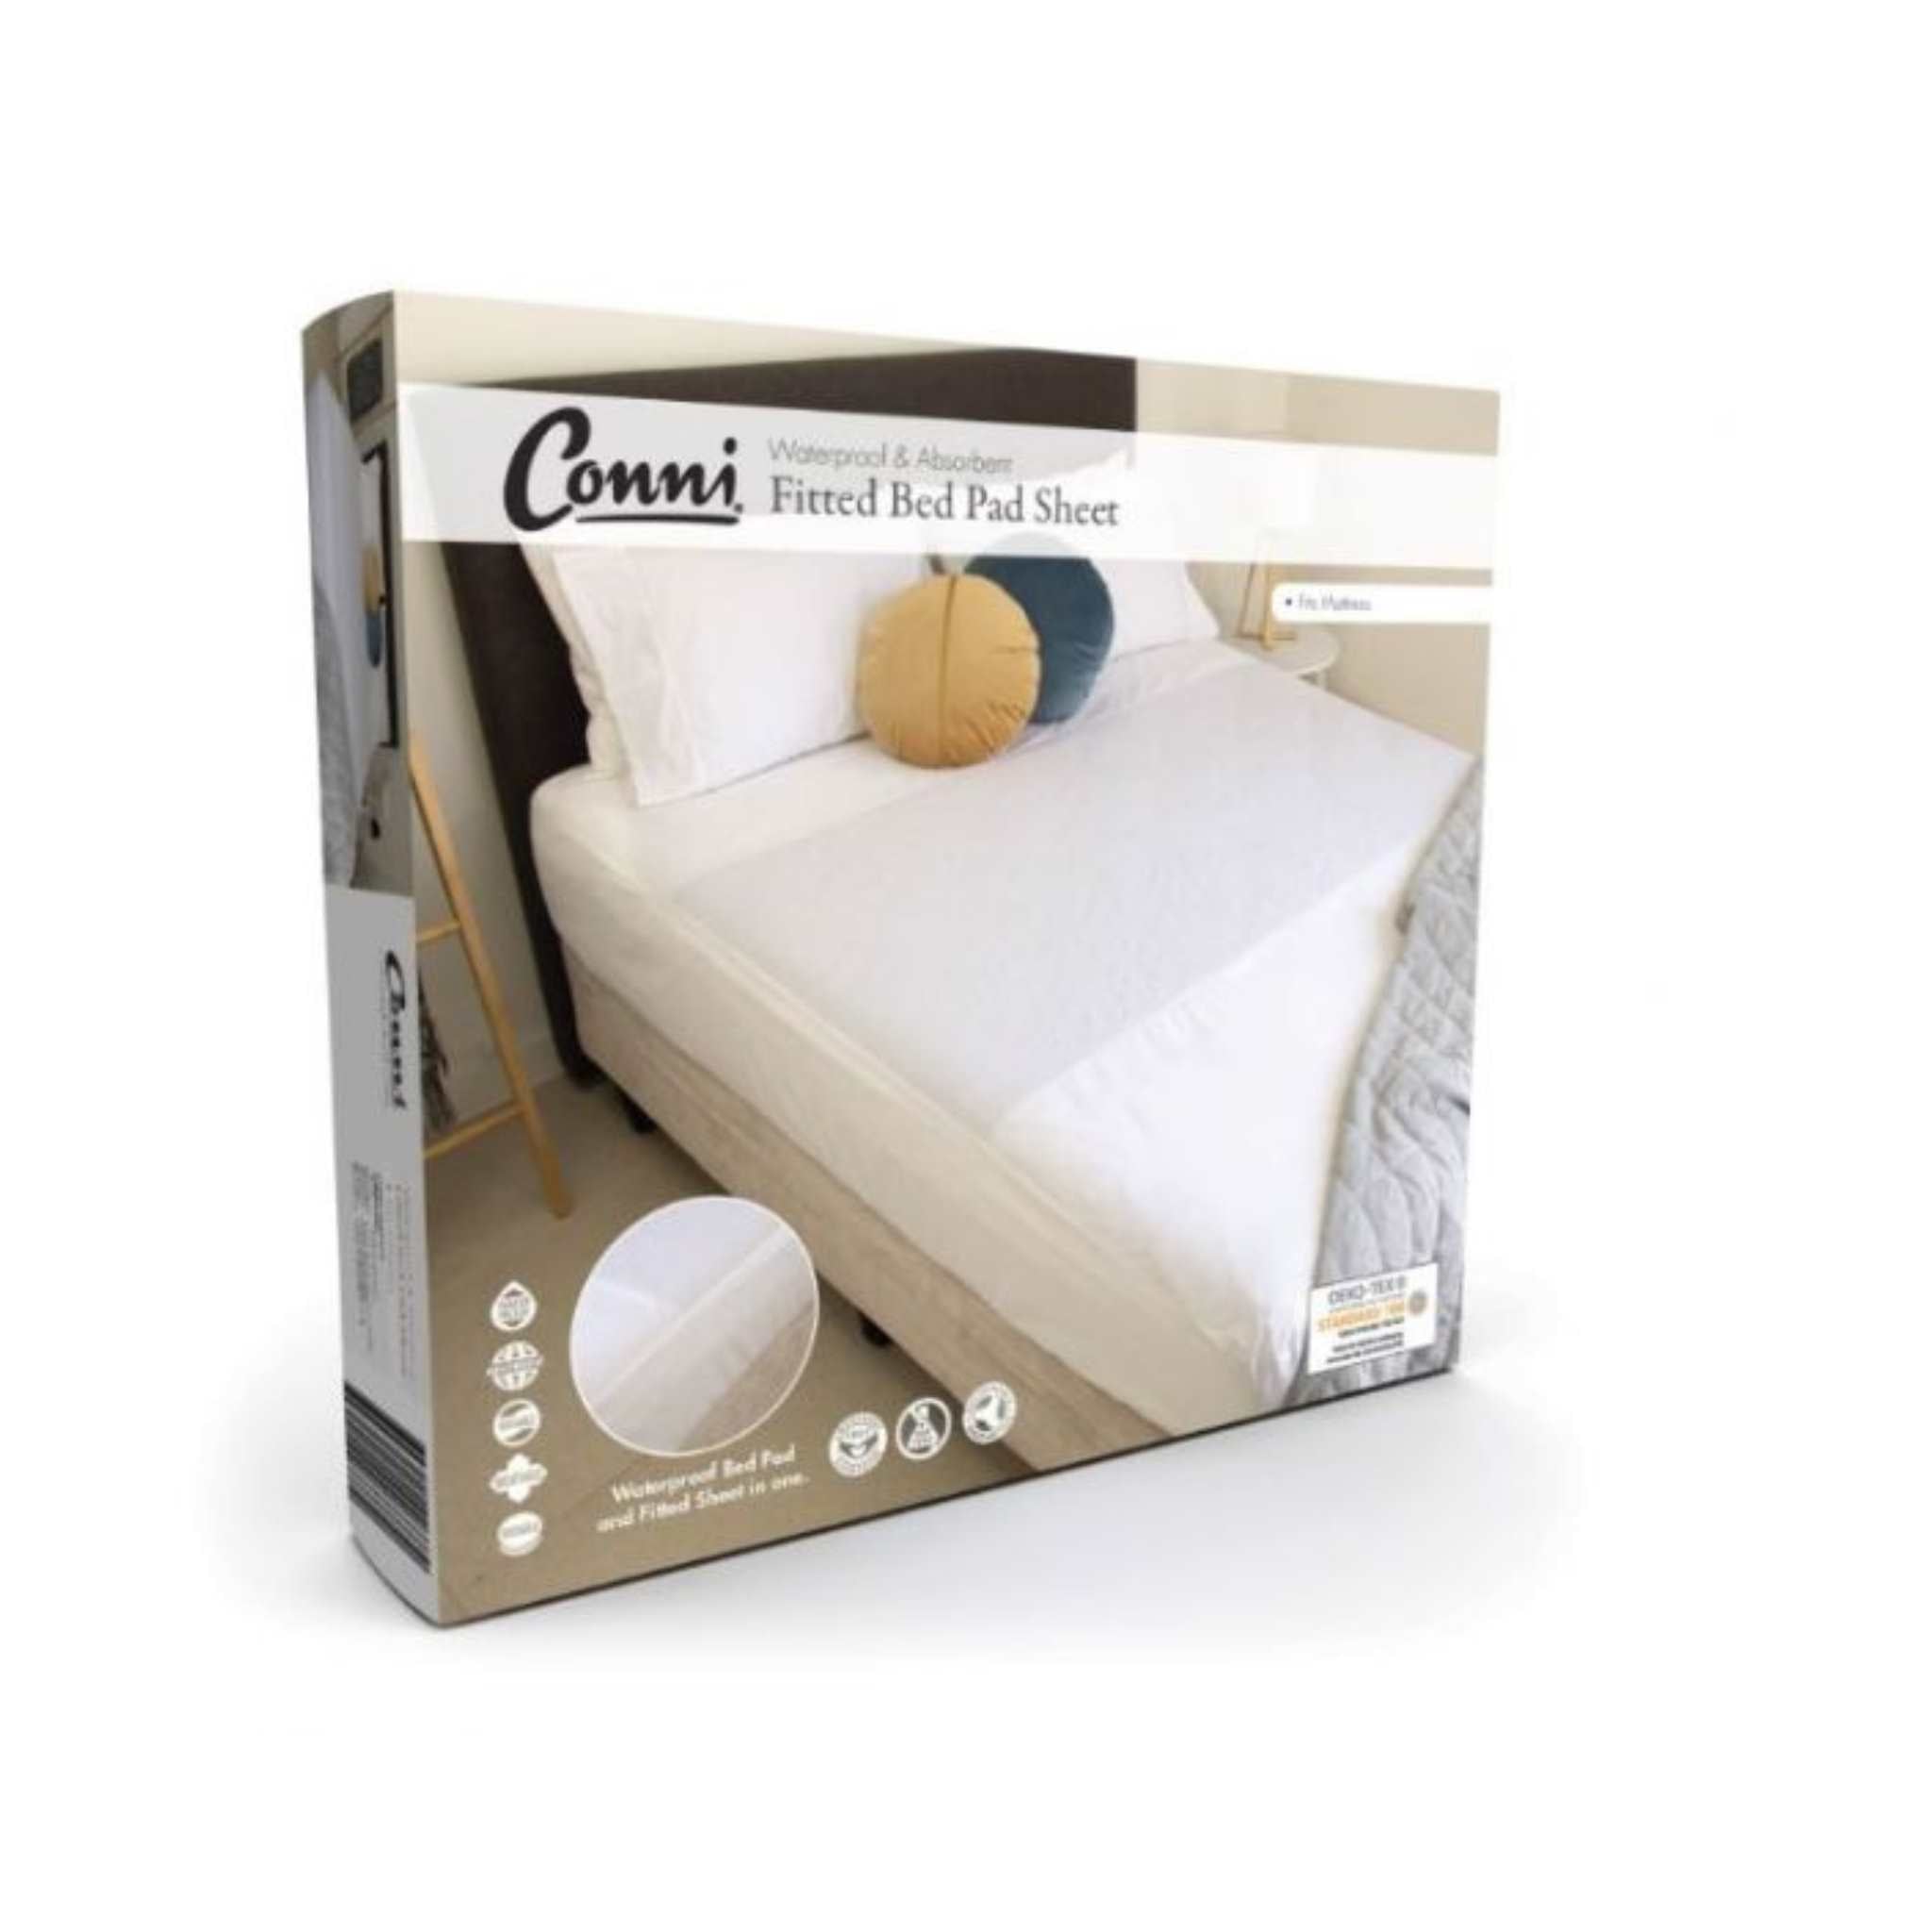 Conni Fitted Bed Pad Sheet from Aged Care and Medical